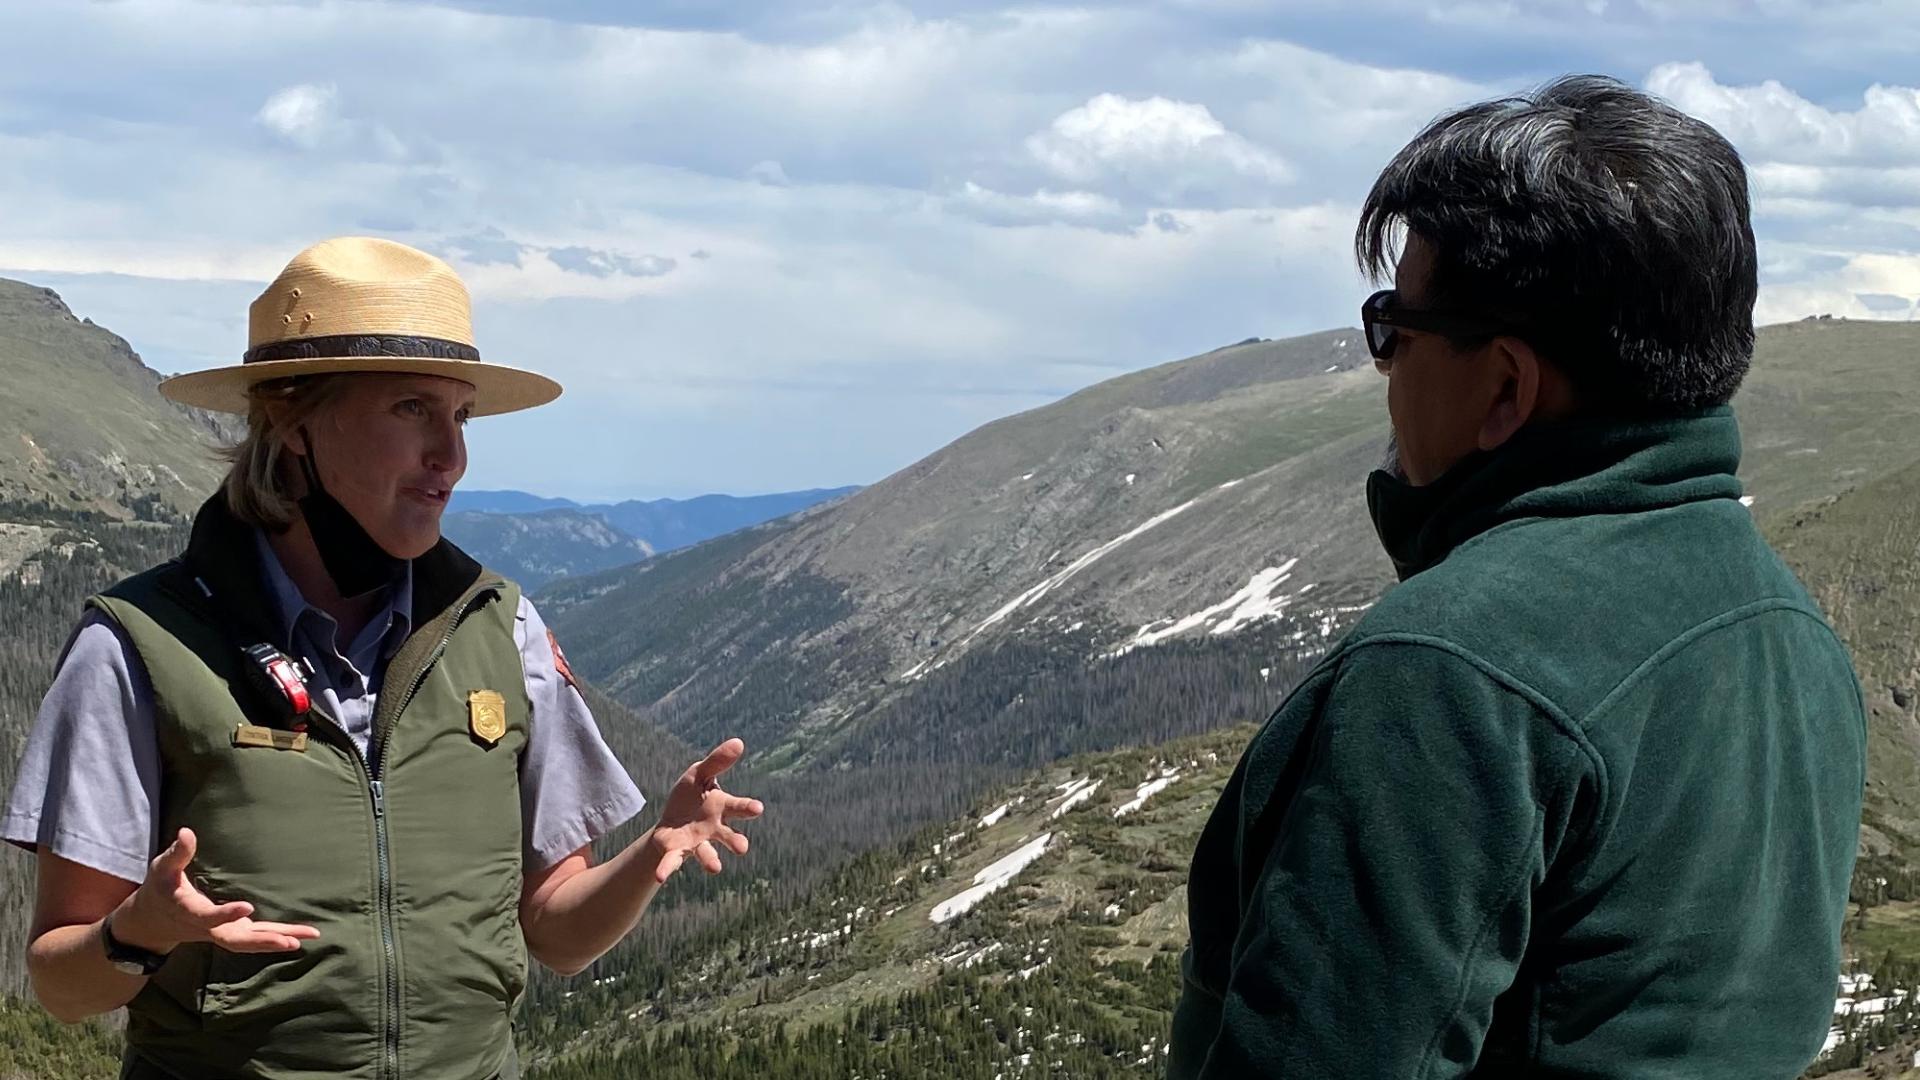 Man in green jacket speaks with park ranger with mountain scenery and blue sky in background.